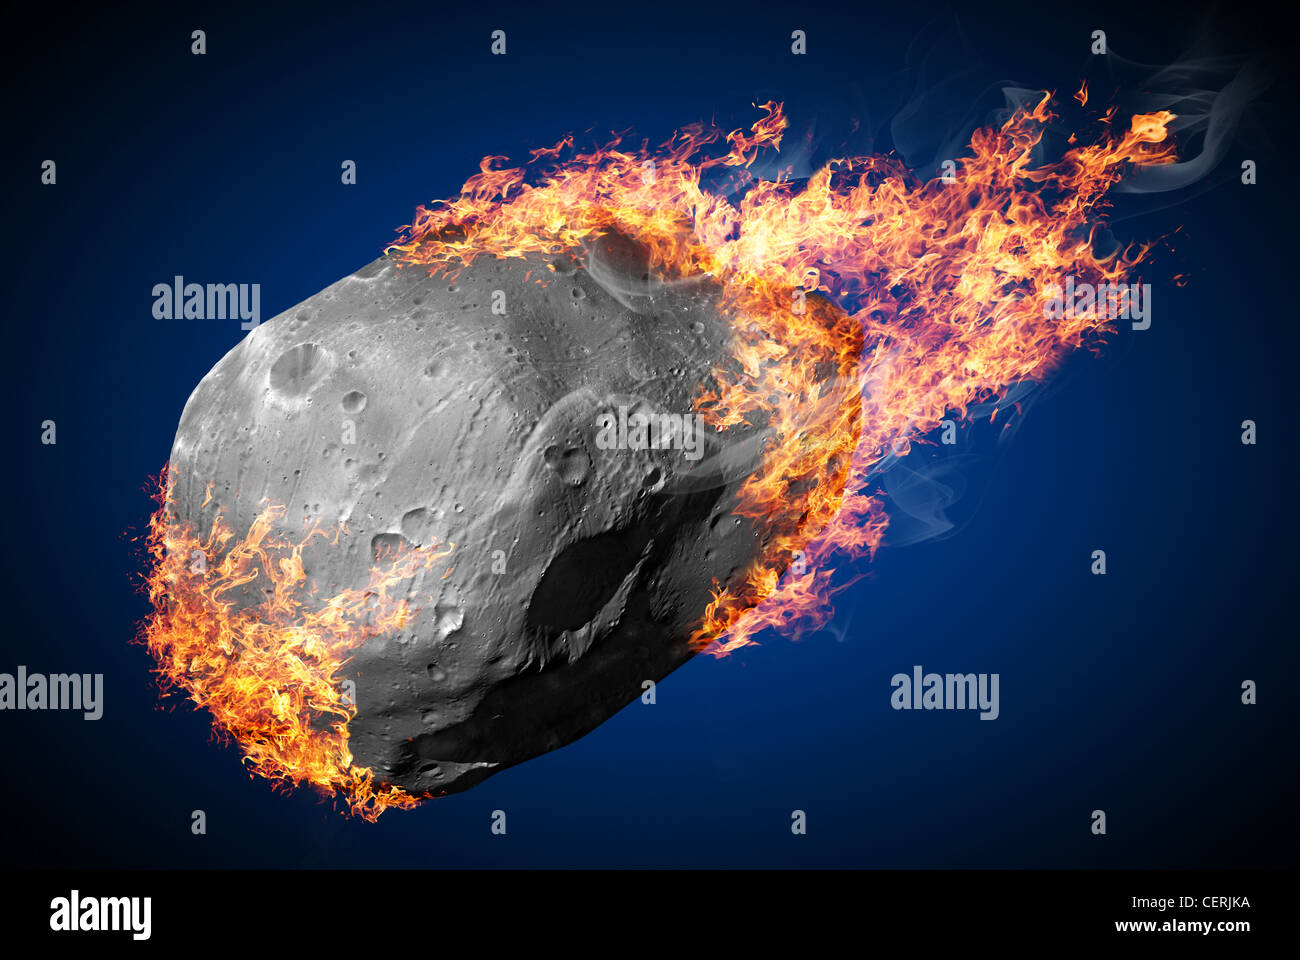 Flying comet on fire Stock Photo